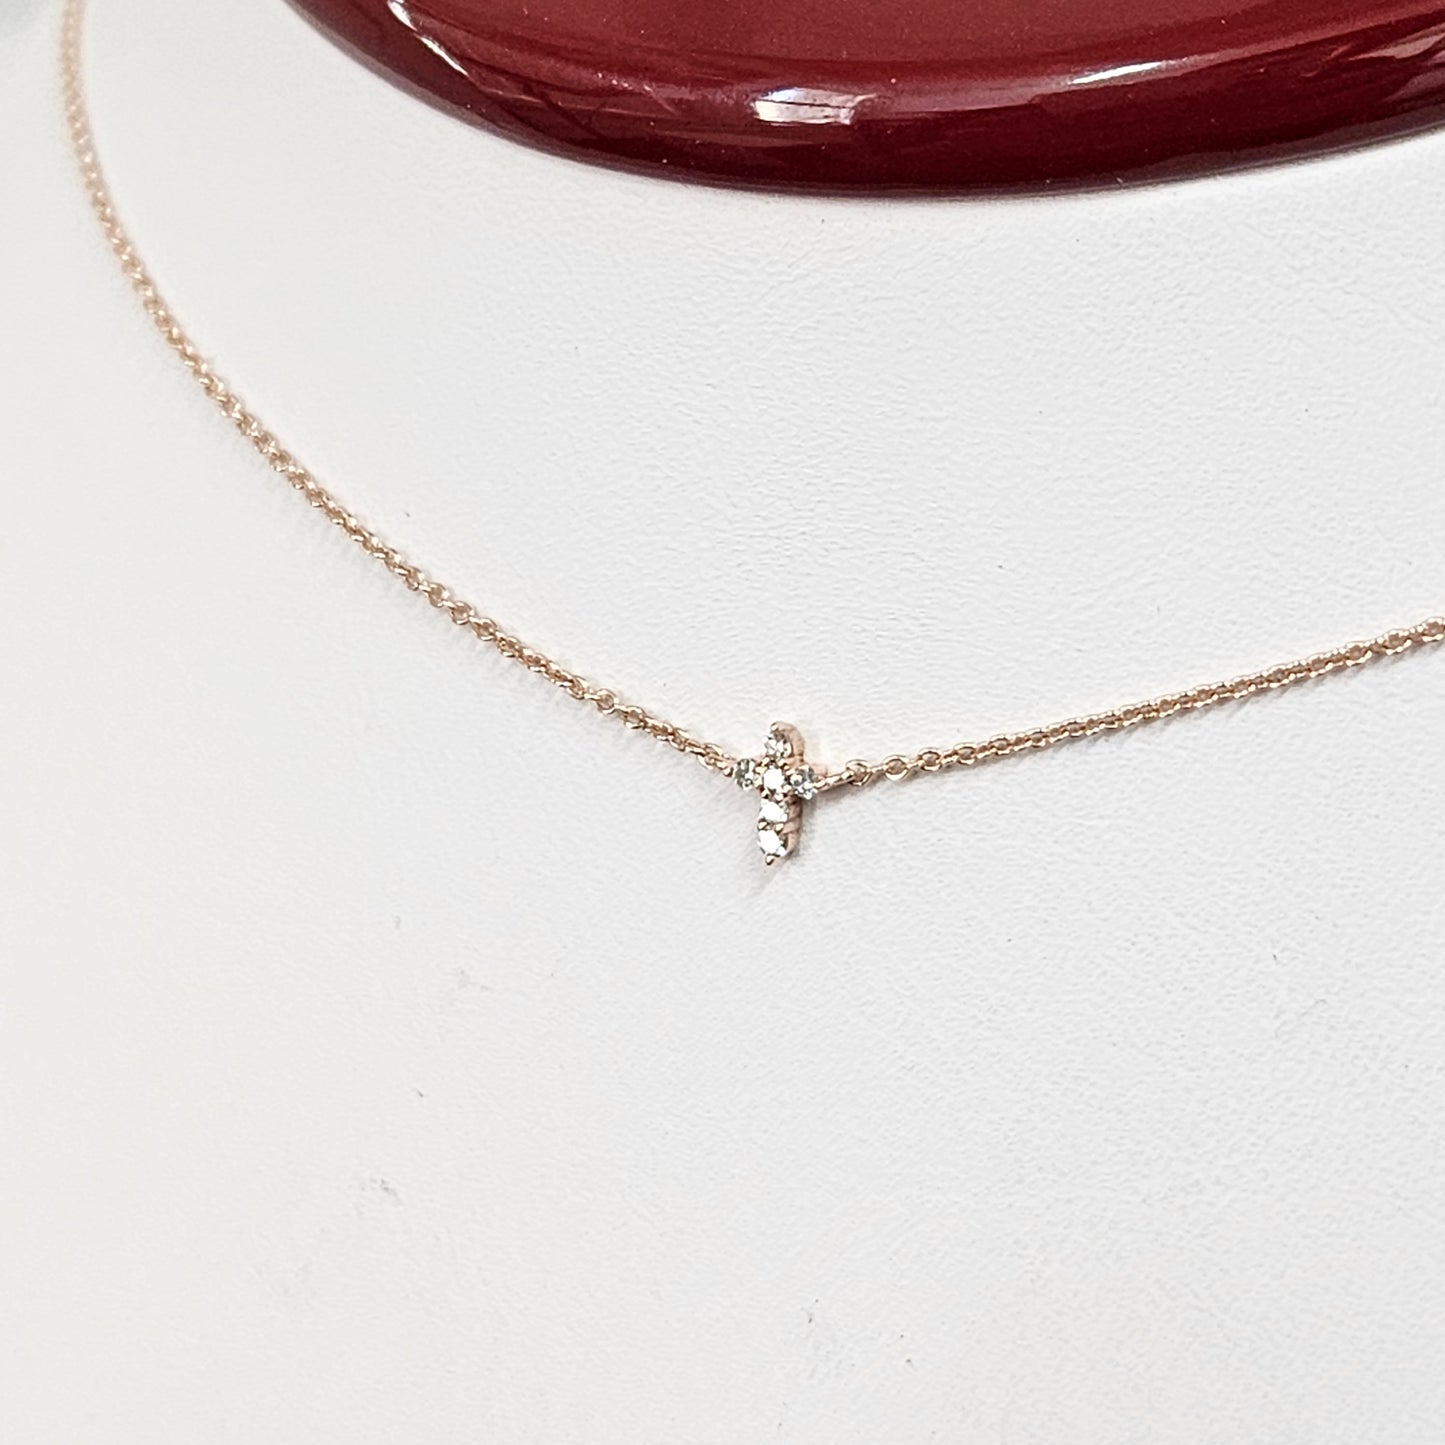 Dainty Simple small Cross Necklace / Adjustable Length /14K Gold Diamond Cross Necklace / Gift for Her / Anniversary Gift